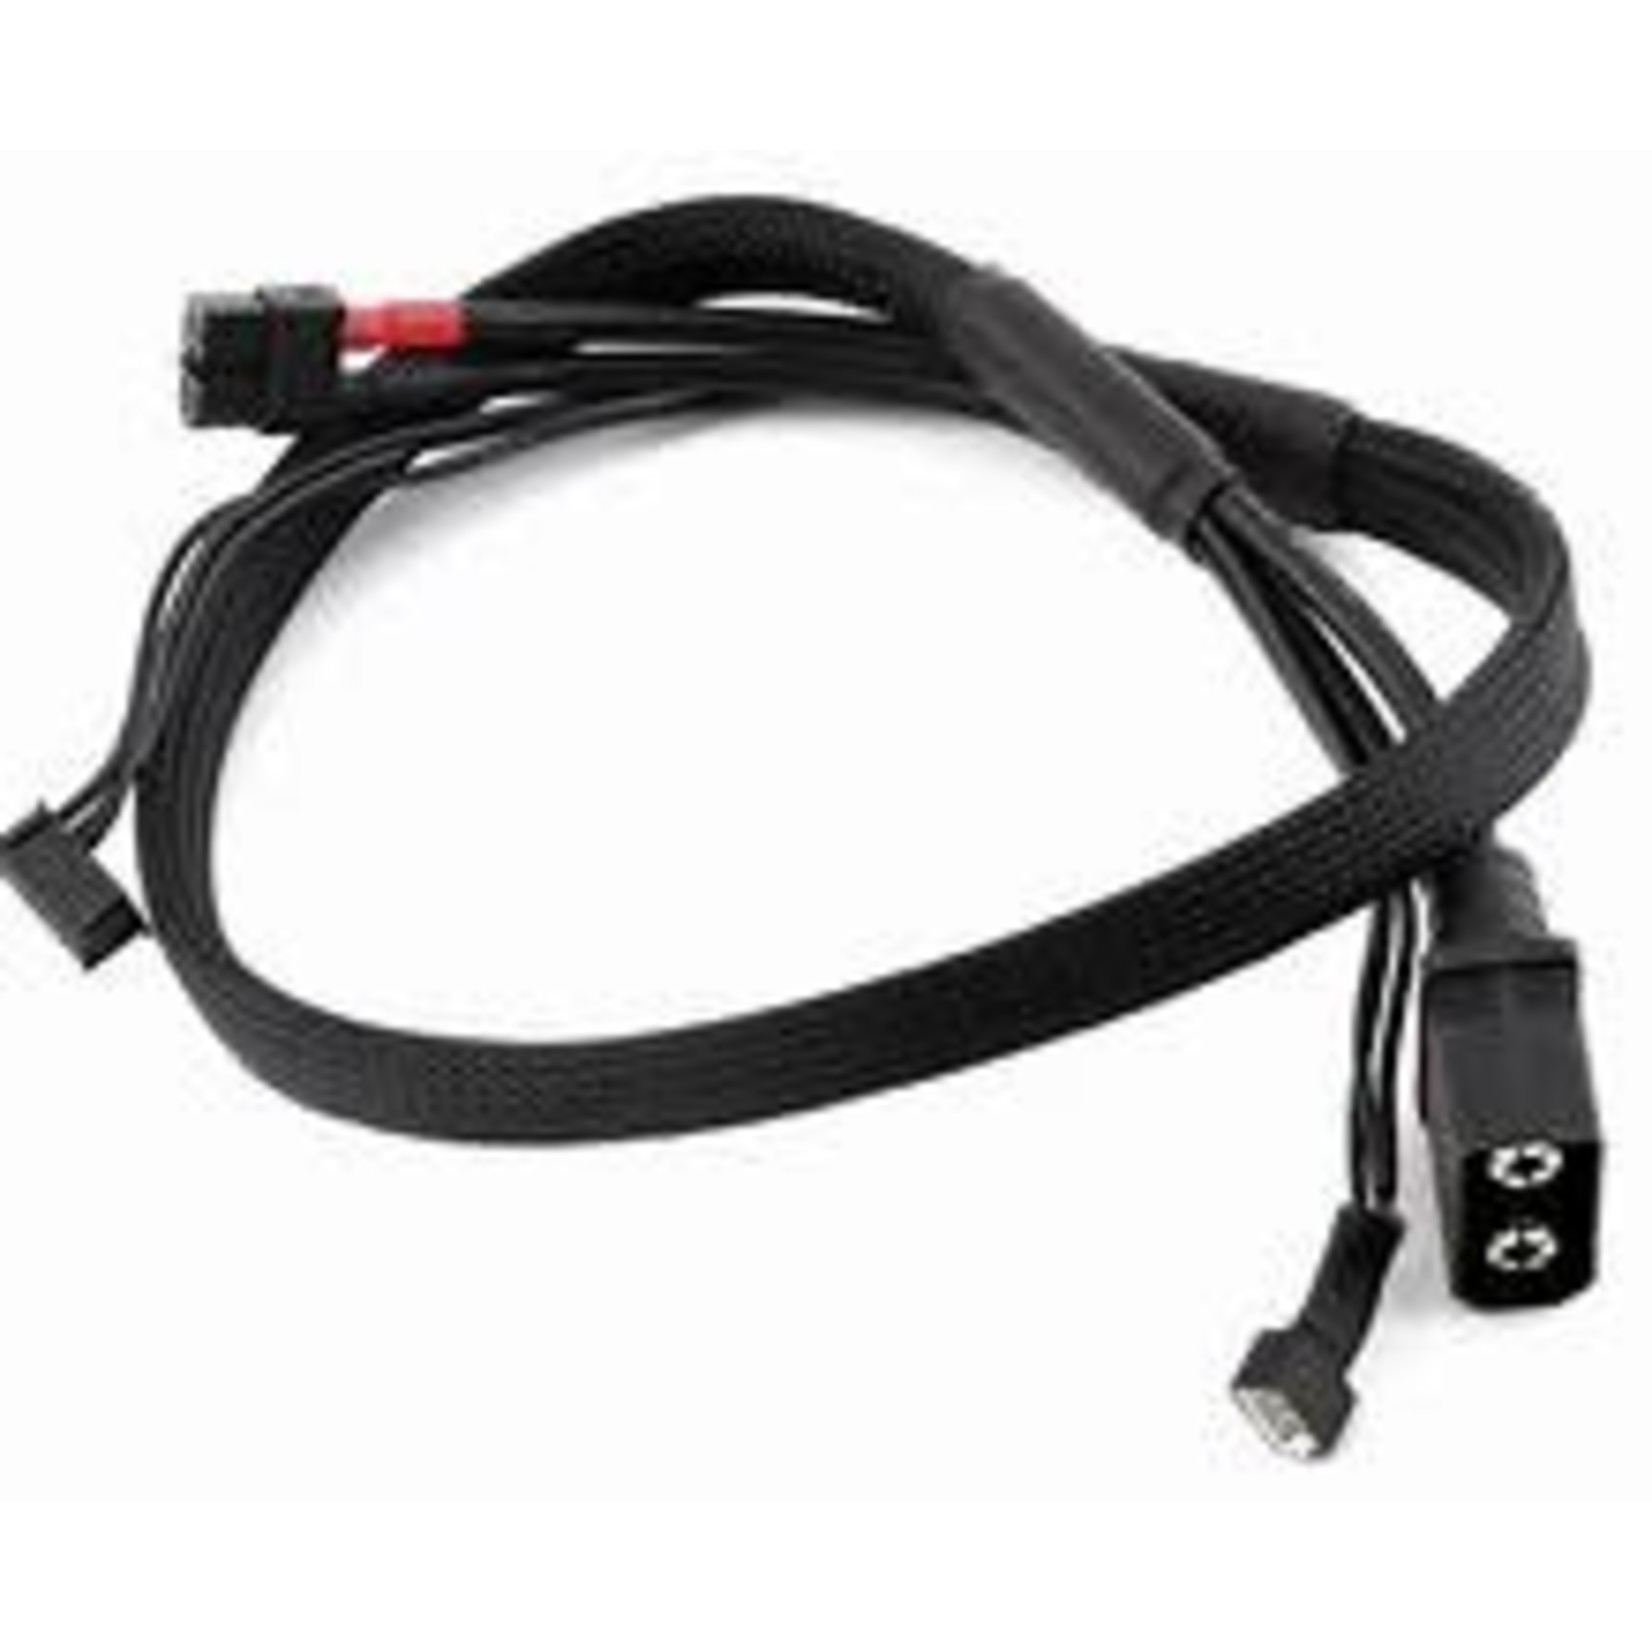 Maclan Racing Parts Max Current 2S Charge Cable Lead w/QS8 Connector